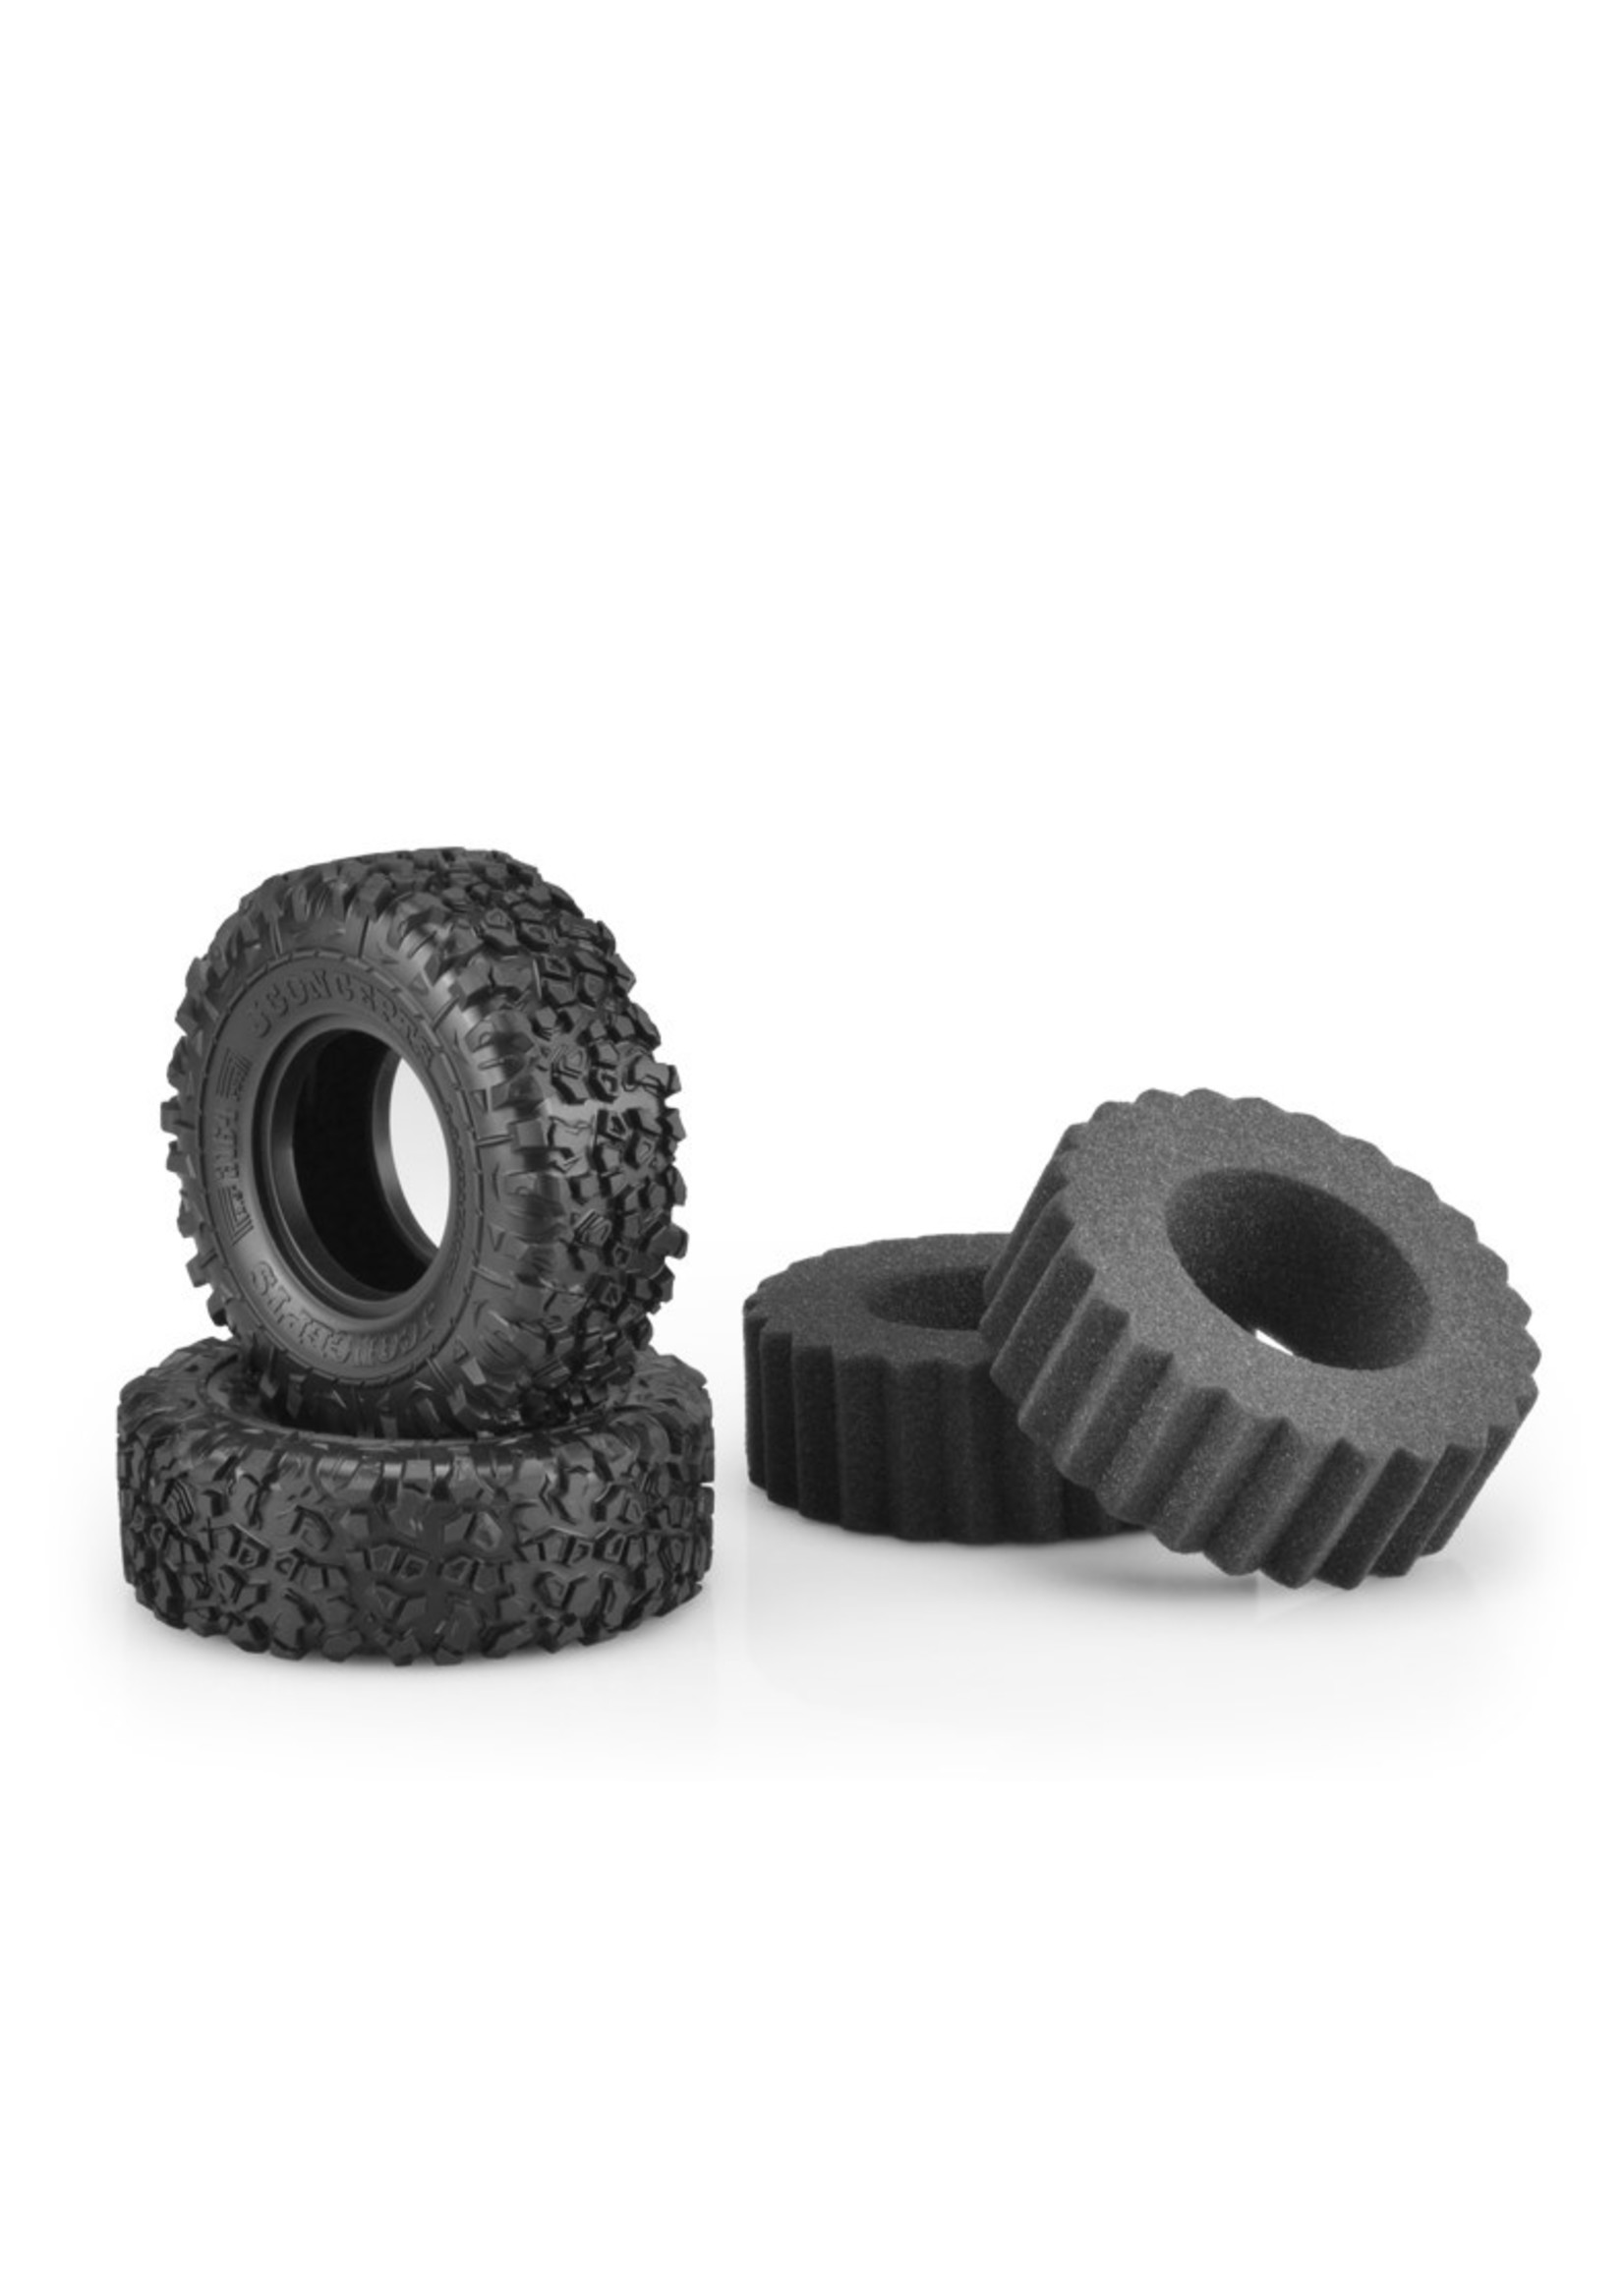 JConcepts JCO316402 - Landmines, Green Compound, 1.9" (4.19" O.D.) Scale Country Tires